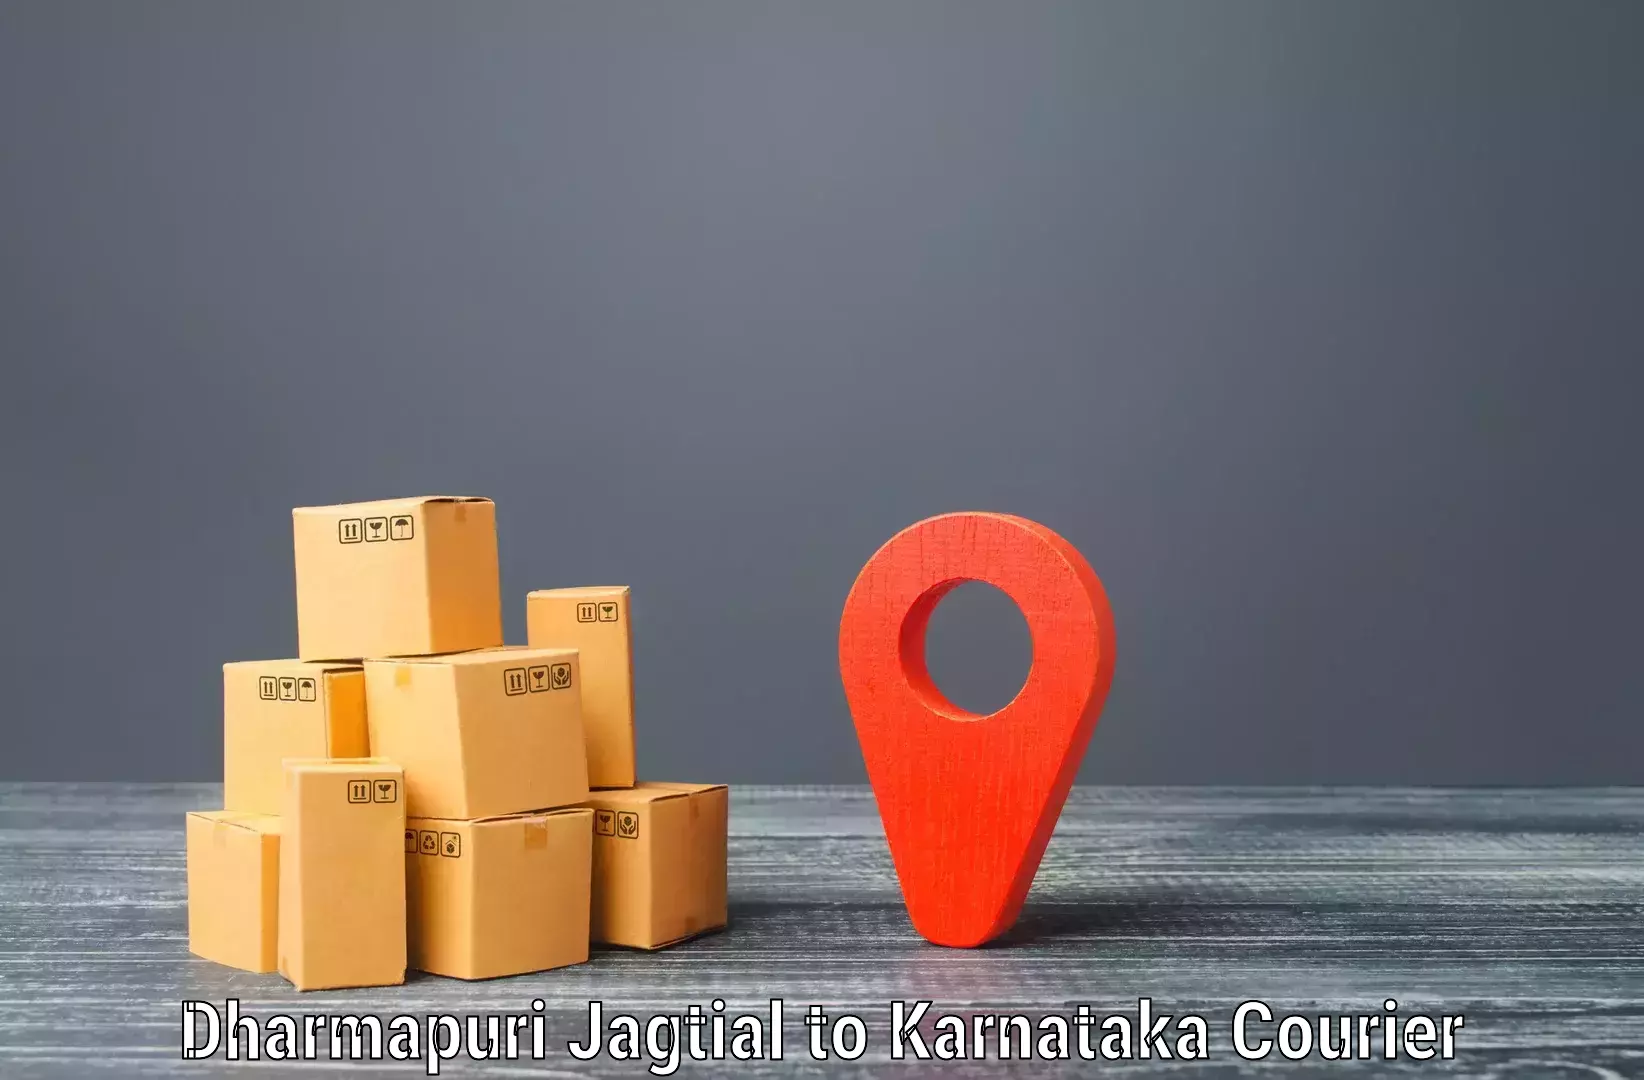 End-to-end delivery Dharmapuri Jagtial to Sira